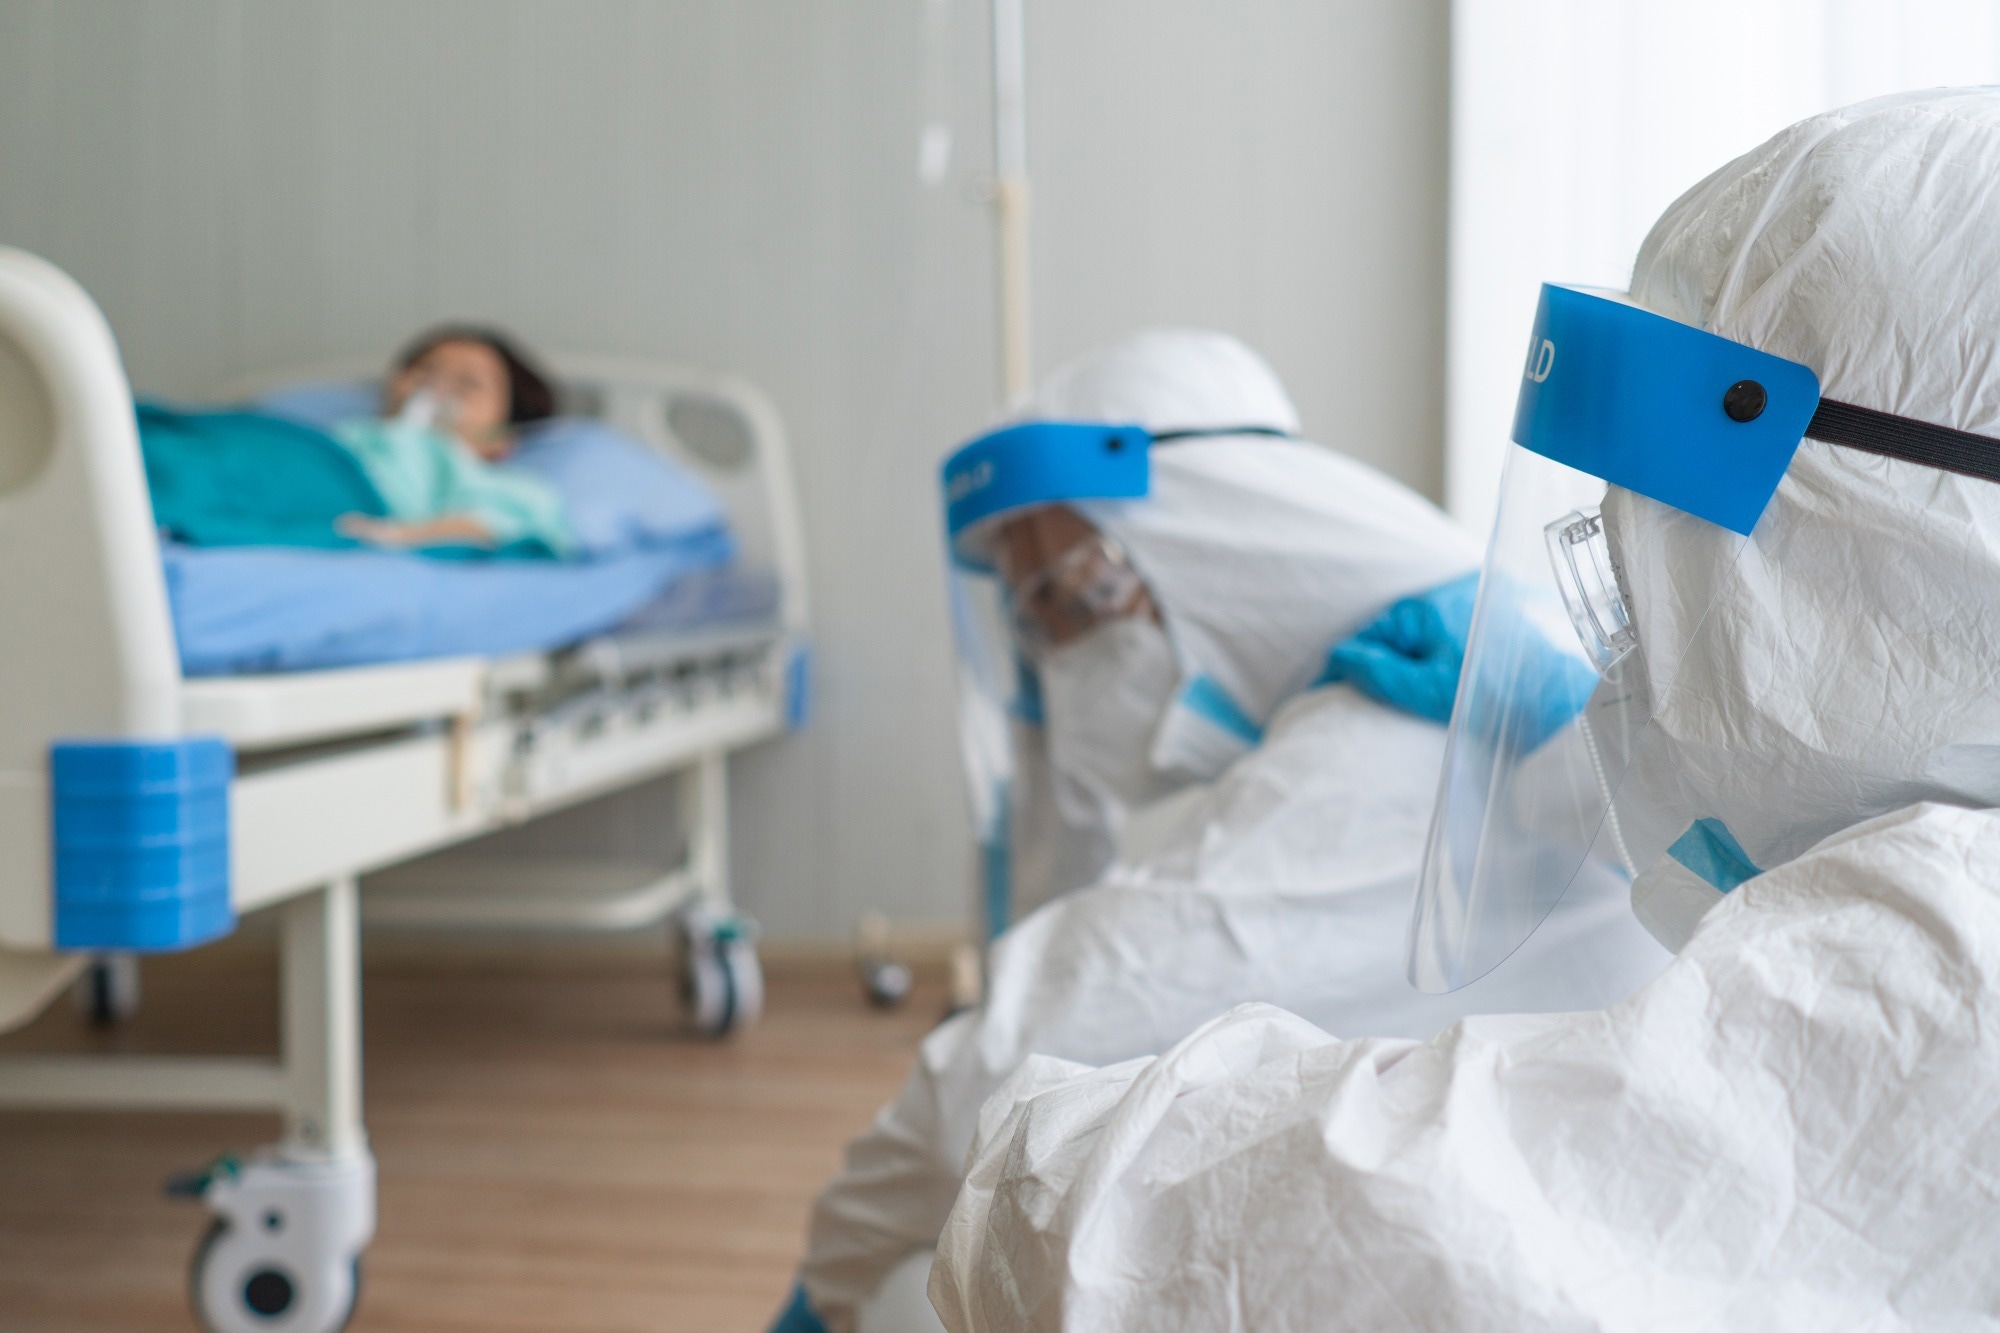 Study: Two years of Covid-19: Excess mortality by age, region, gender, and race/ethnicity in the United States during the Covid-19 pandemic, March 1, 2020, through February 28, 2022. Image Credit: plo/Shutterstock